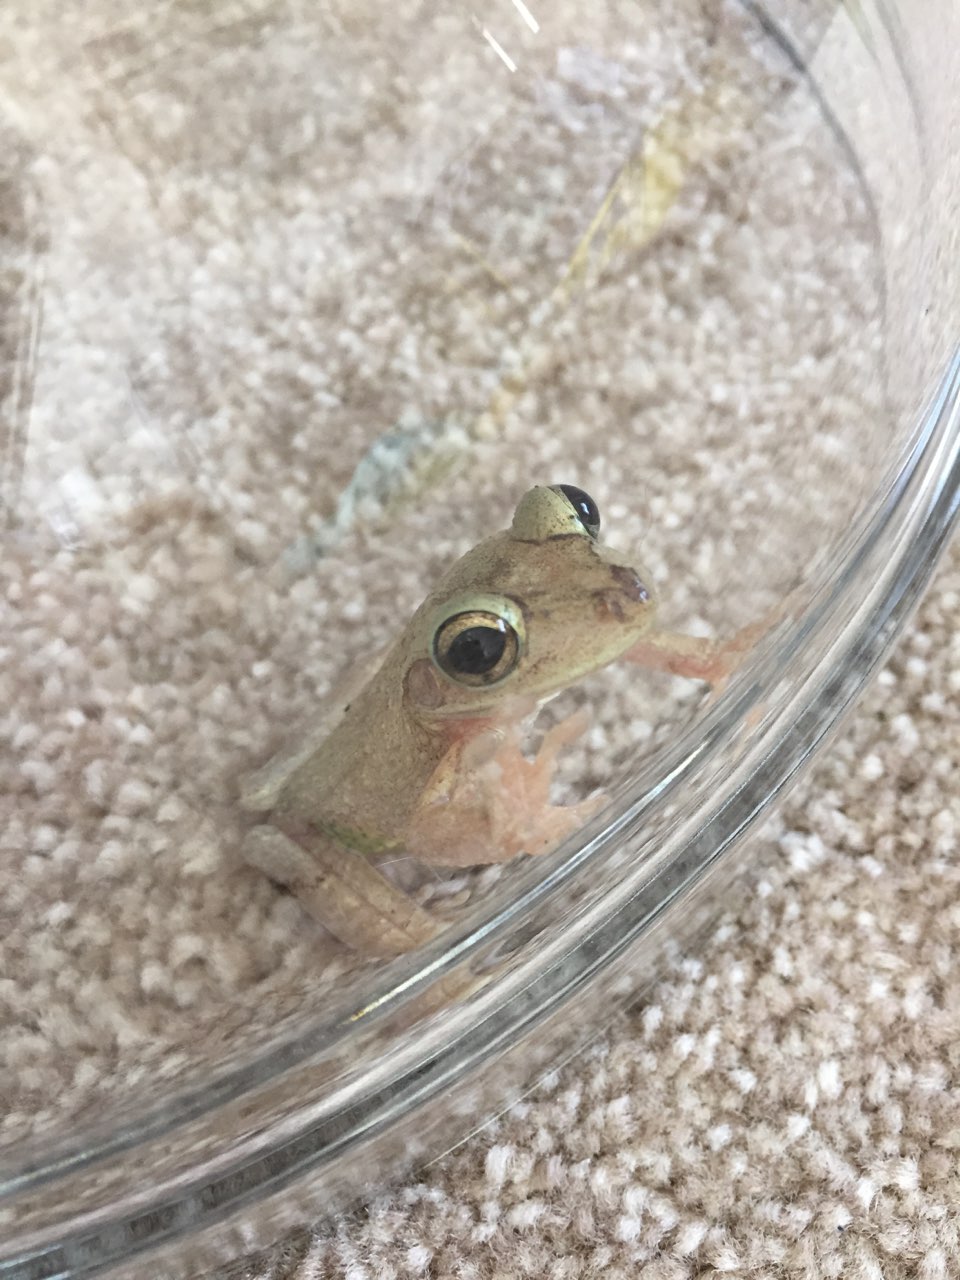 An exotic tree frog which stowed away in a suitcase and travelled to the UK from Florida (RSPCA)